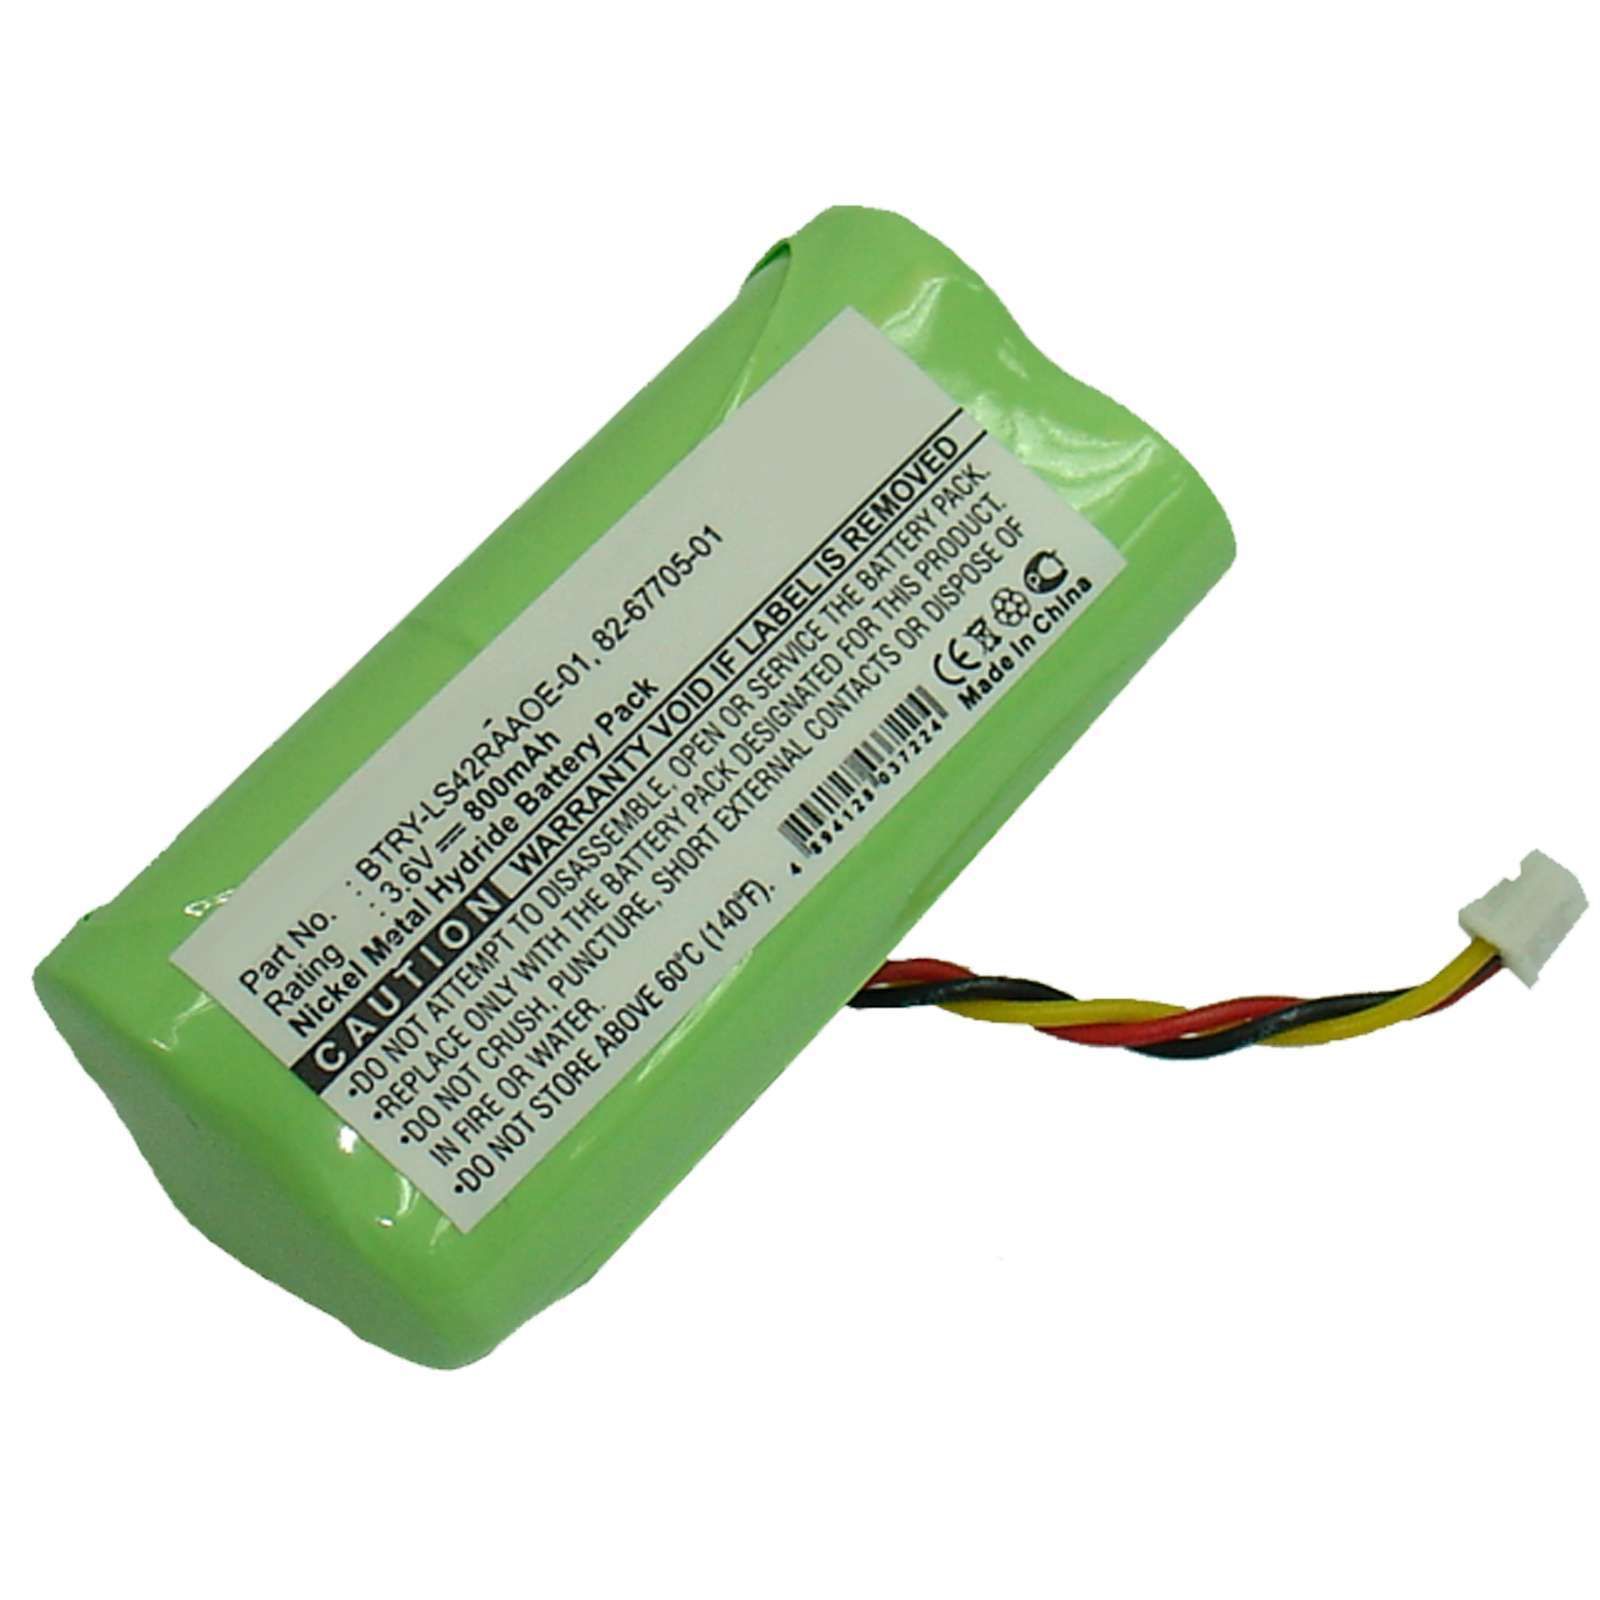 Scanner Battery FitsSymbol LS4278 Replaces 82-67705-01